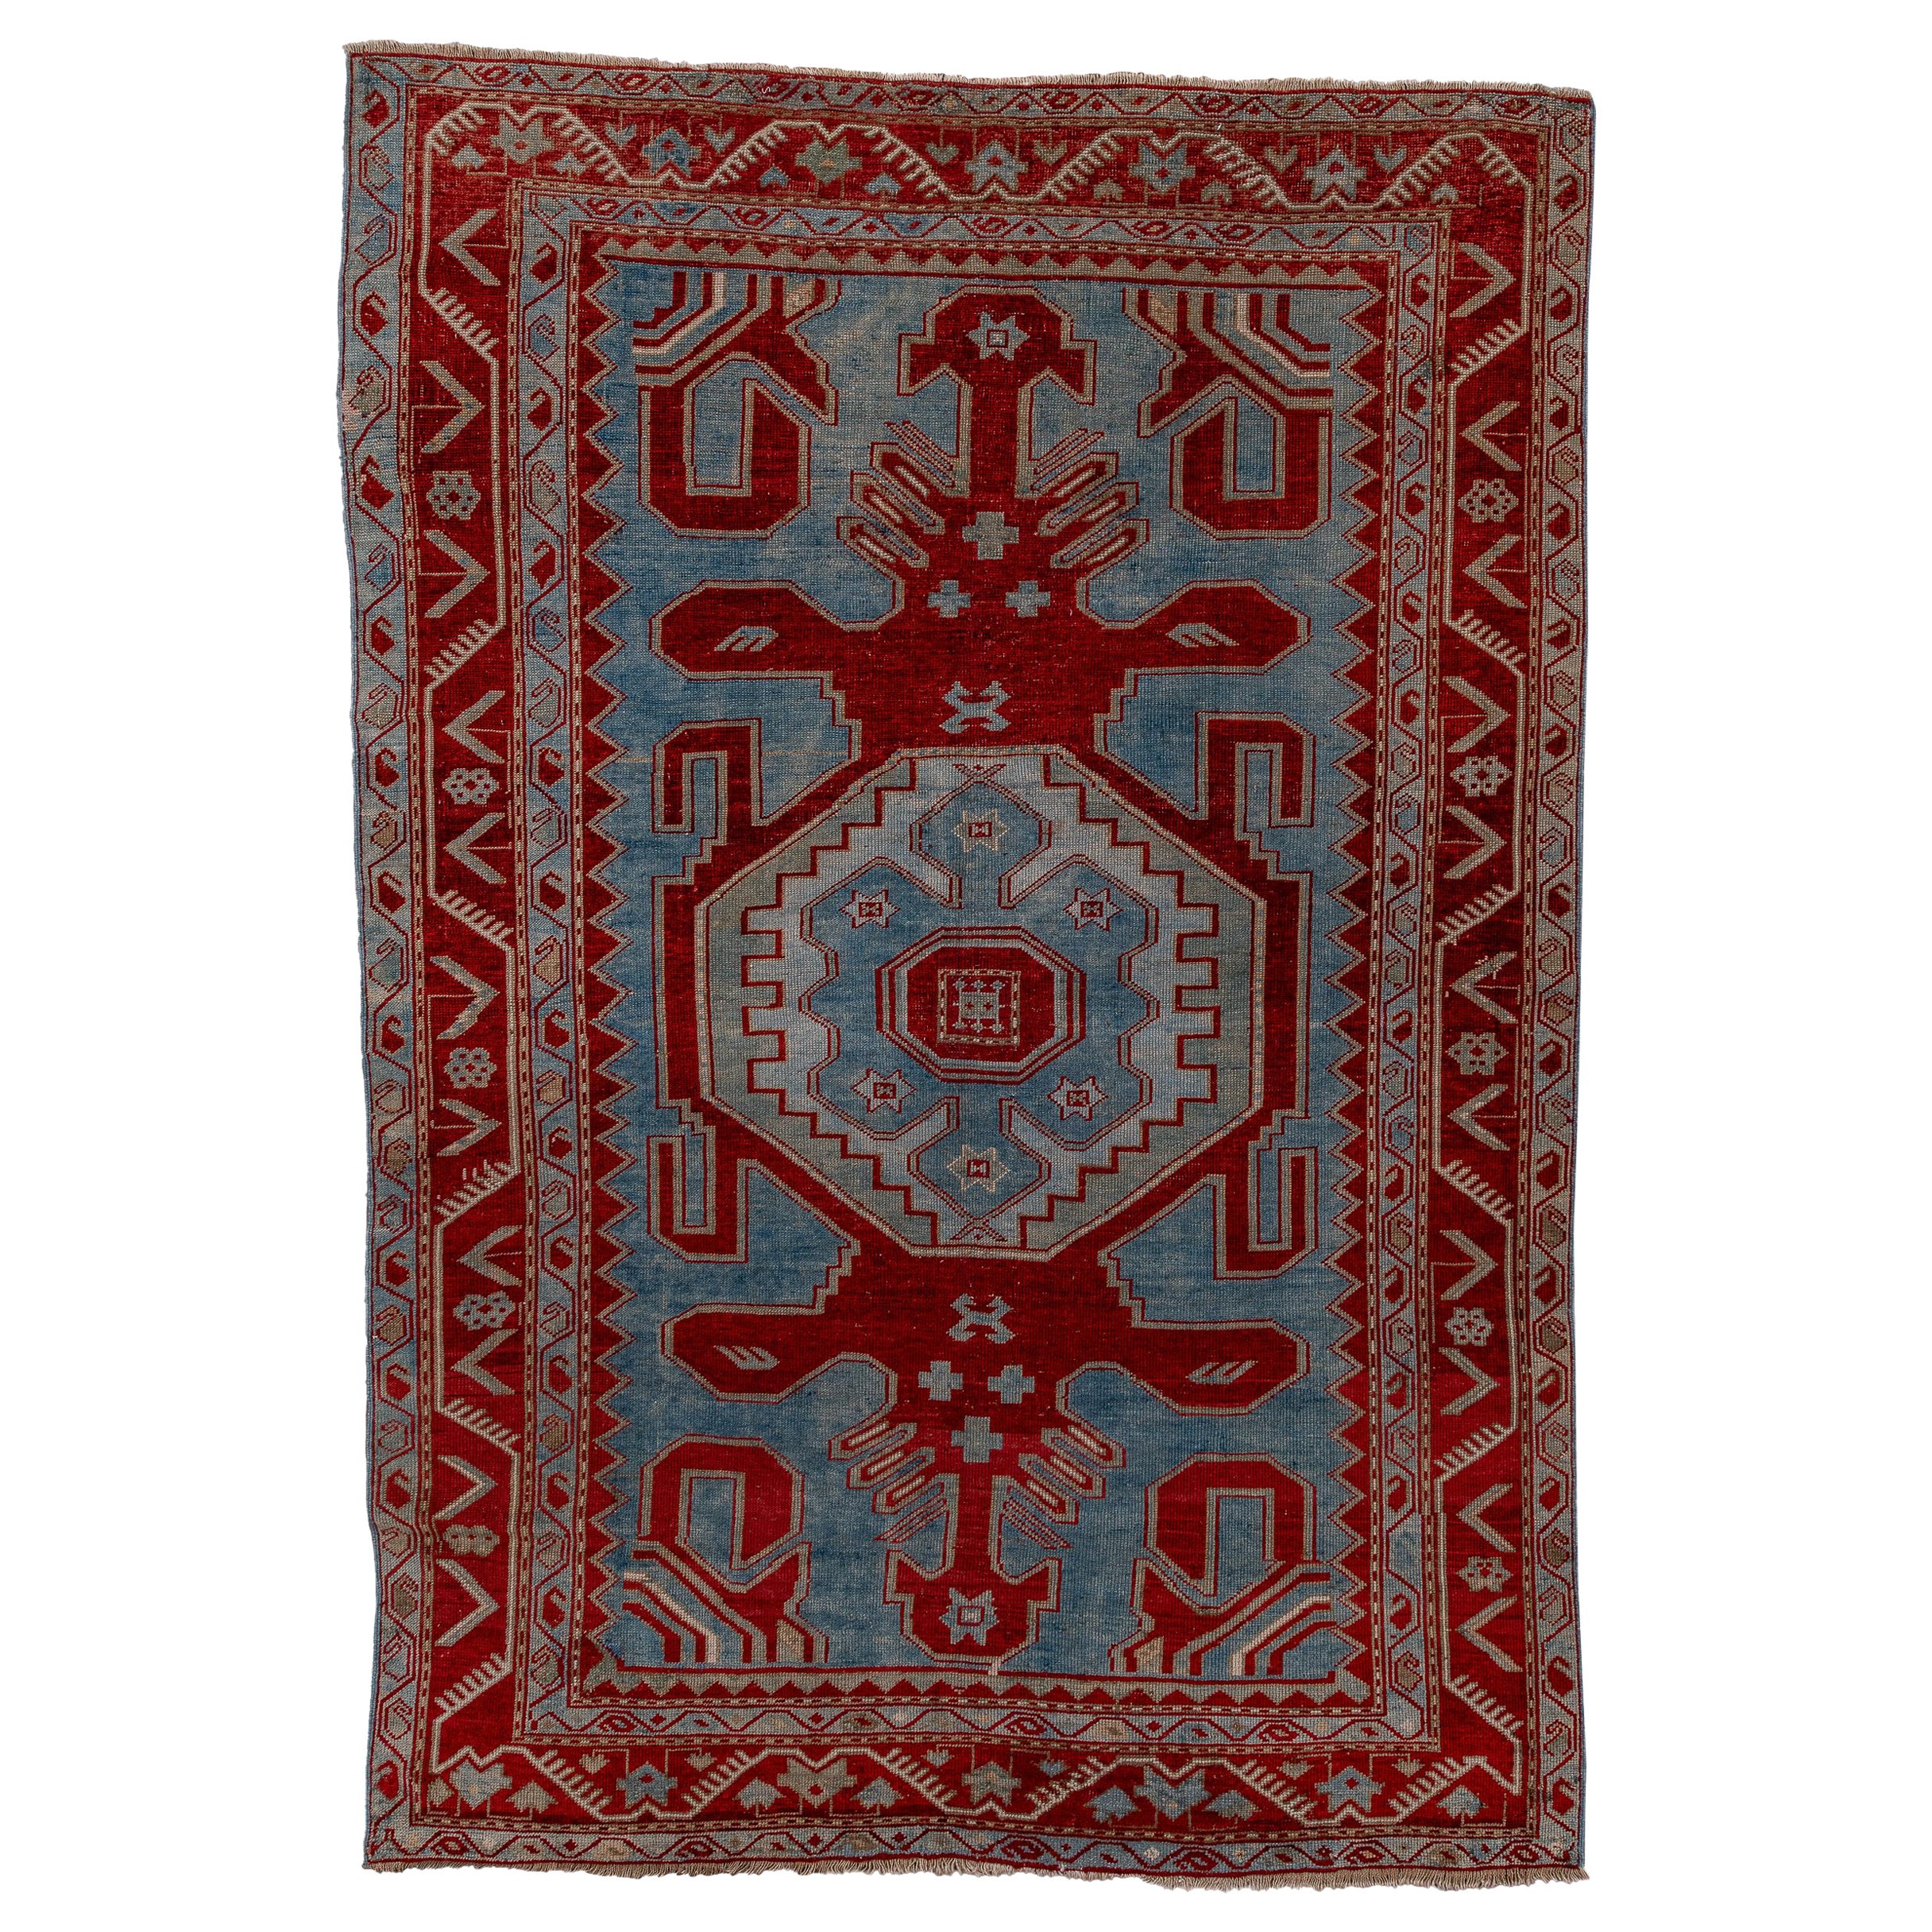 Antique Kazak Rug with Bold Red Border and Blue Field